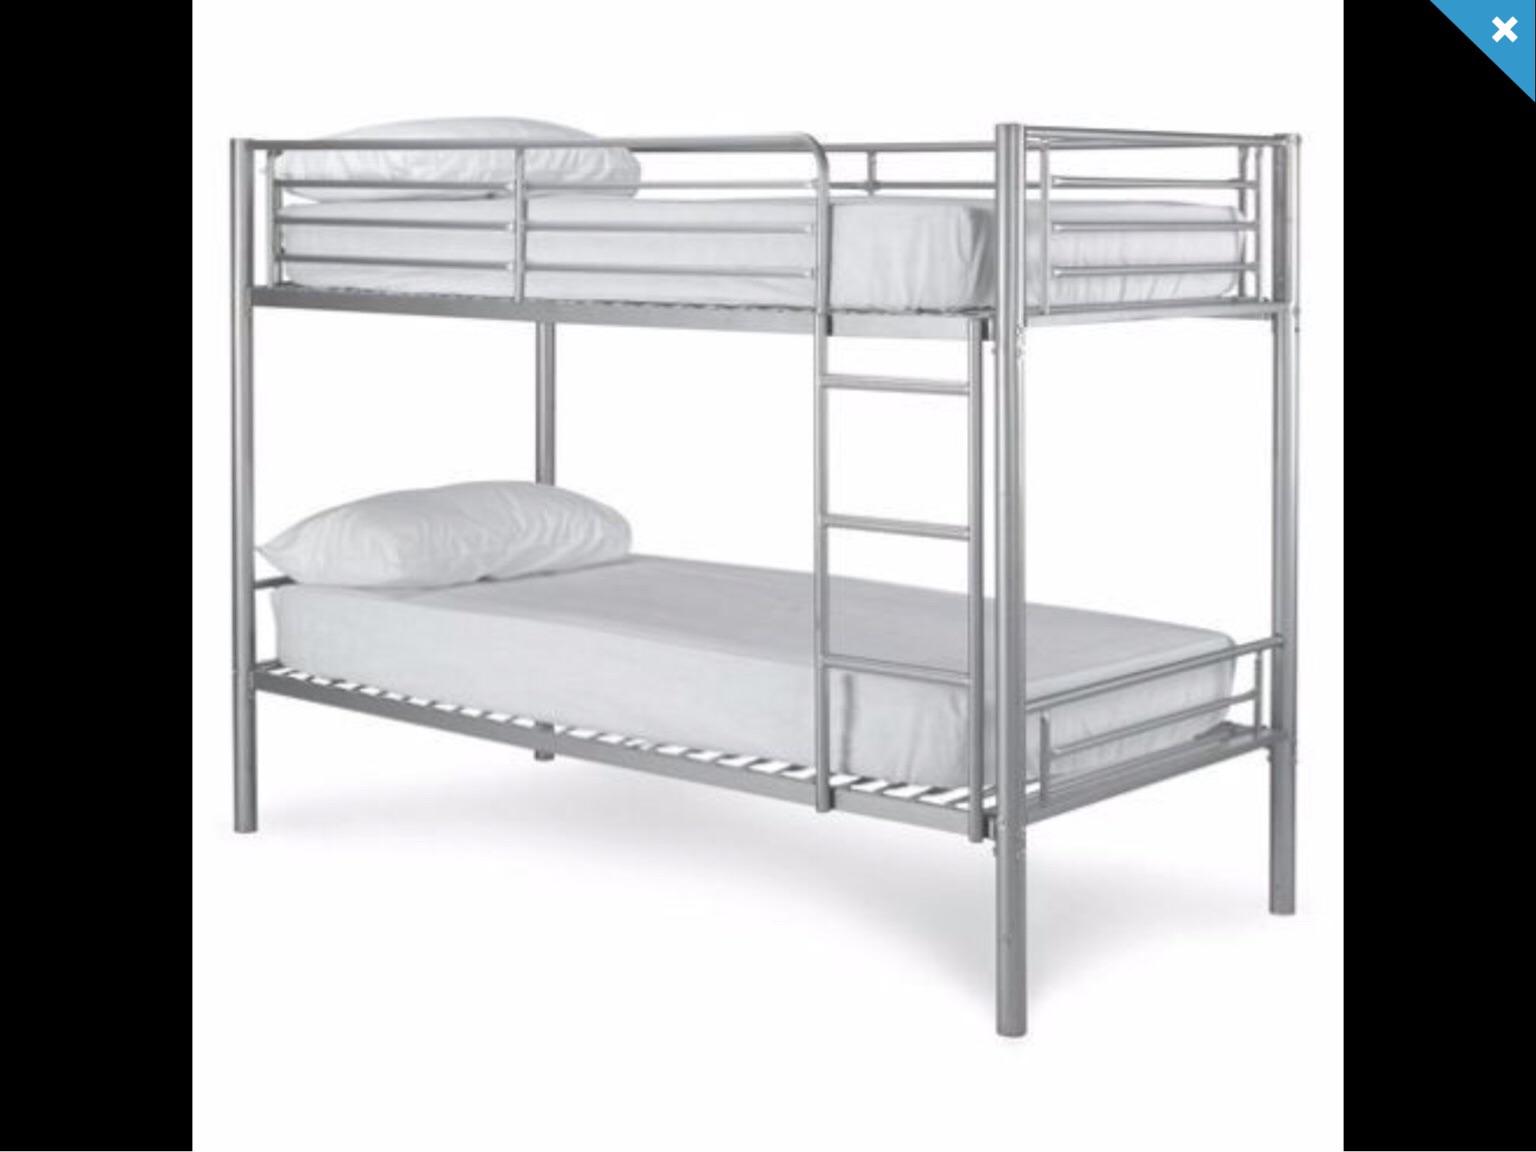 Ikea Svarta Bunk Bed In E16 London For 80 00 For Sale Shpock